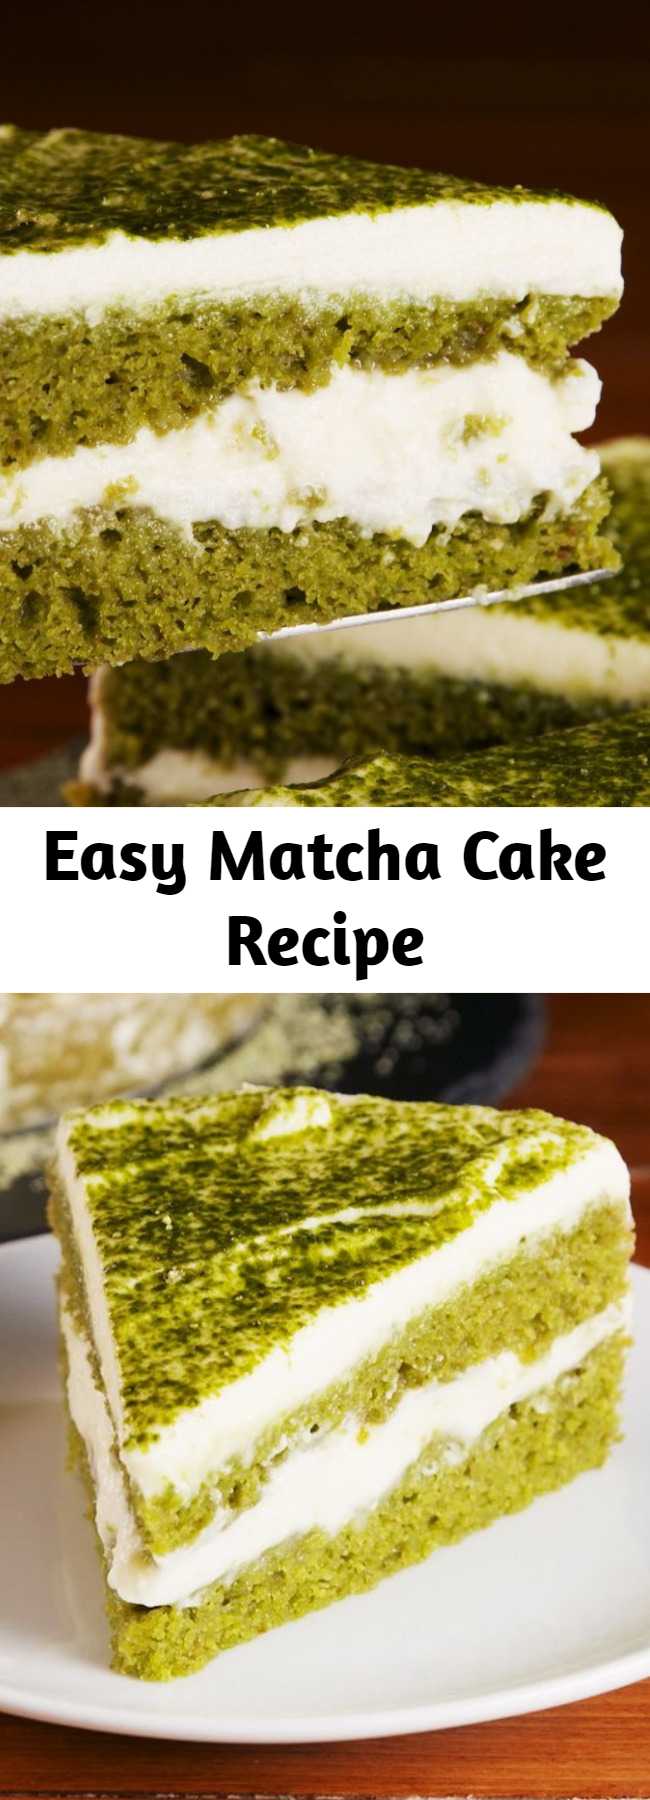 Easy Matcha Cake Recipe - Green Tea Lovers are going to be obsessed with how light this matcha cake and its accompanying frosting are. Here are our best tips when making this easy recipe!